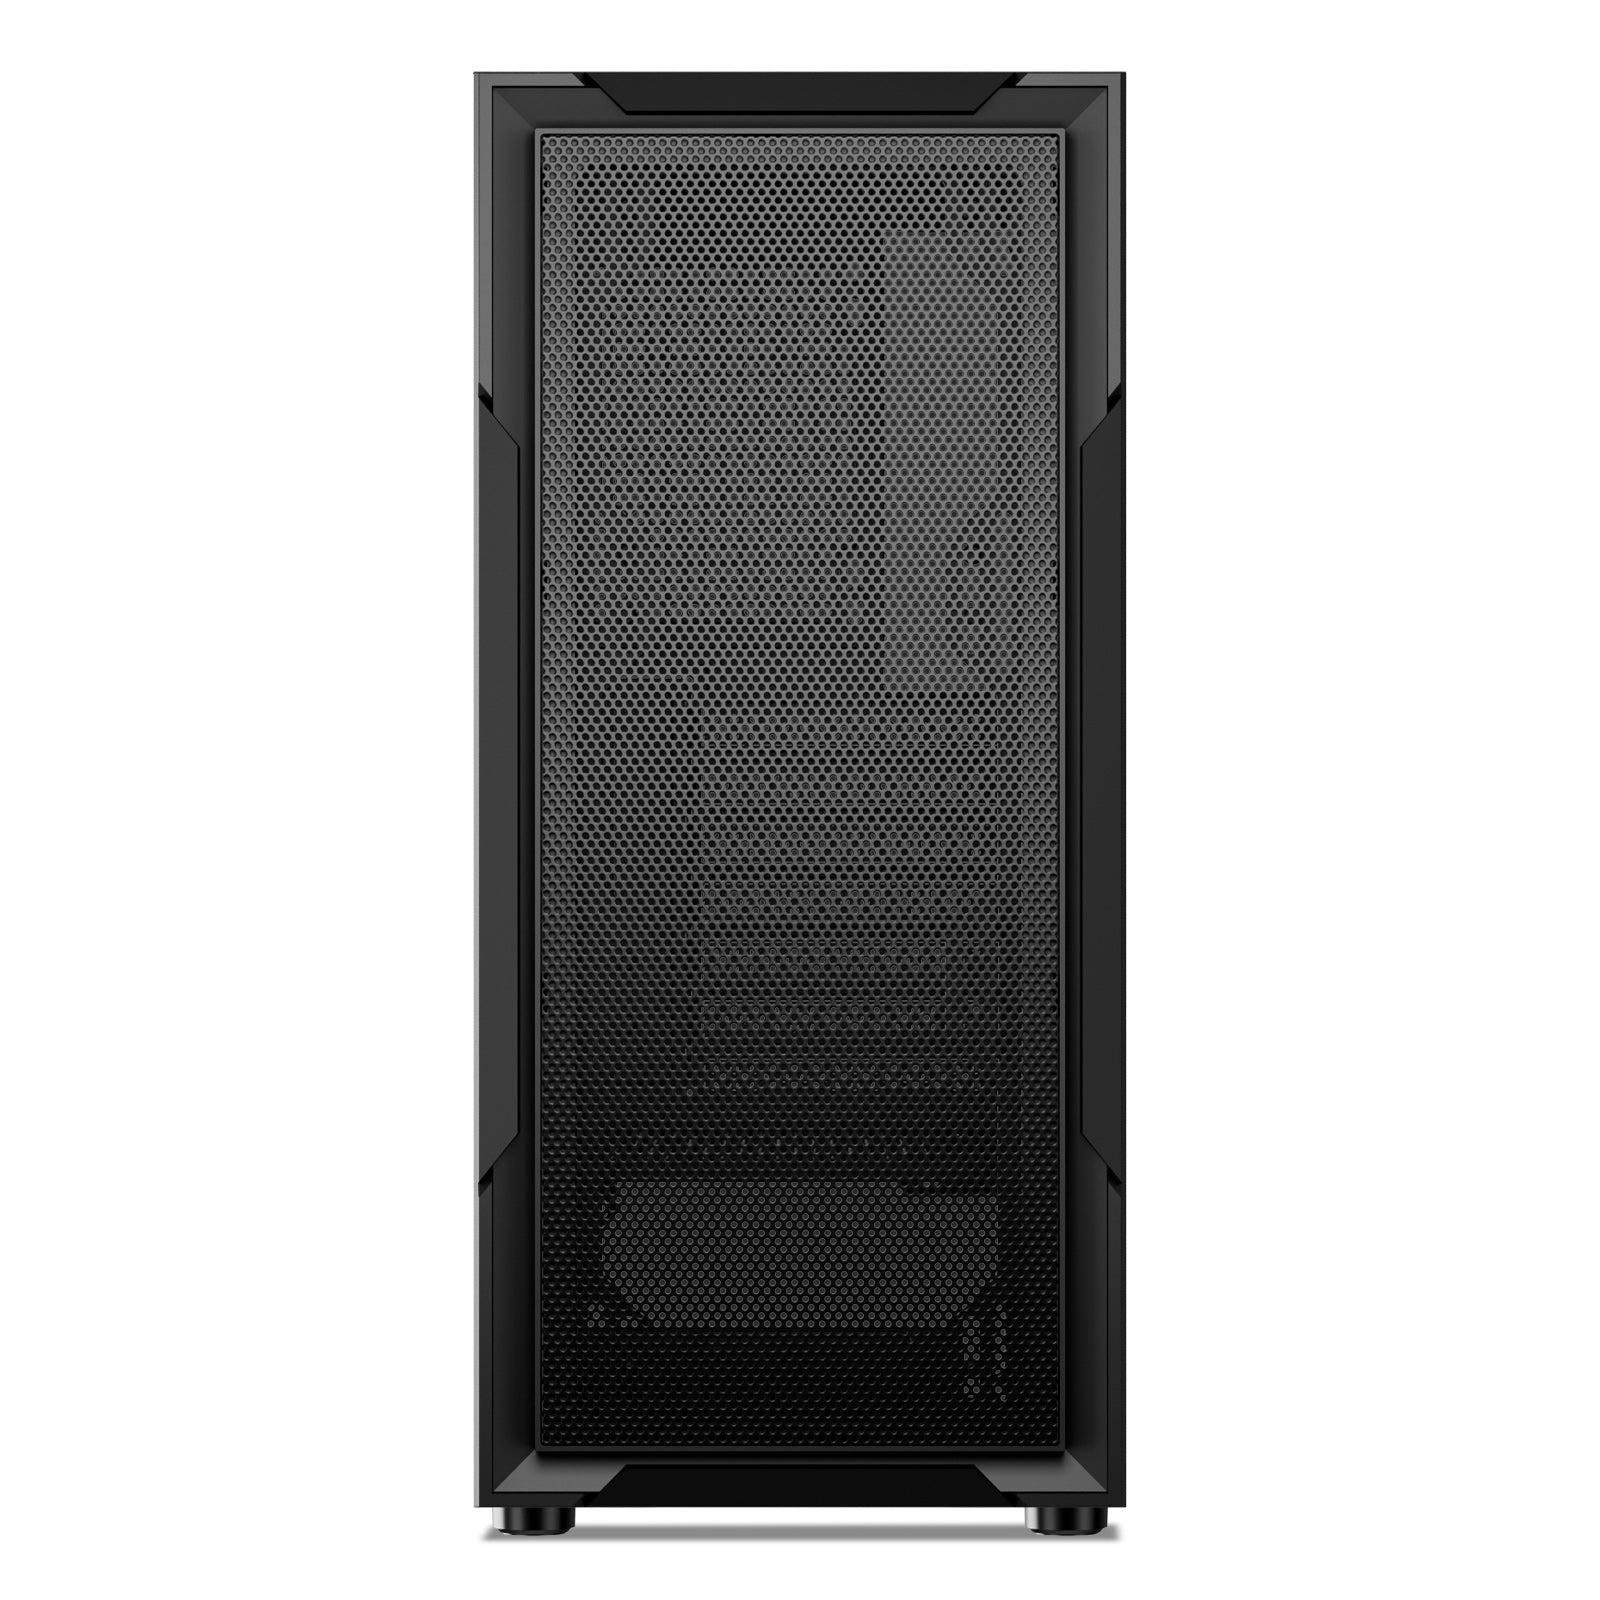 DARKROCK A8-M Black Micro-ATX Mid Tower Computer PC Case for Gaming & Business Tempered Glass Side Panel Support 240mm Radiator on Top and 40 Series GPU 3 x 120mm Cooling Fans Pre-Installed